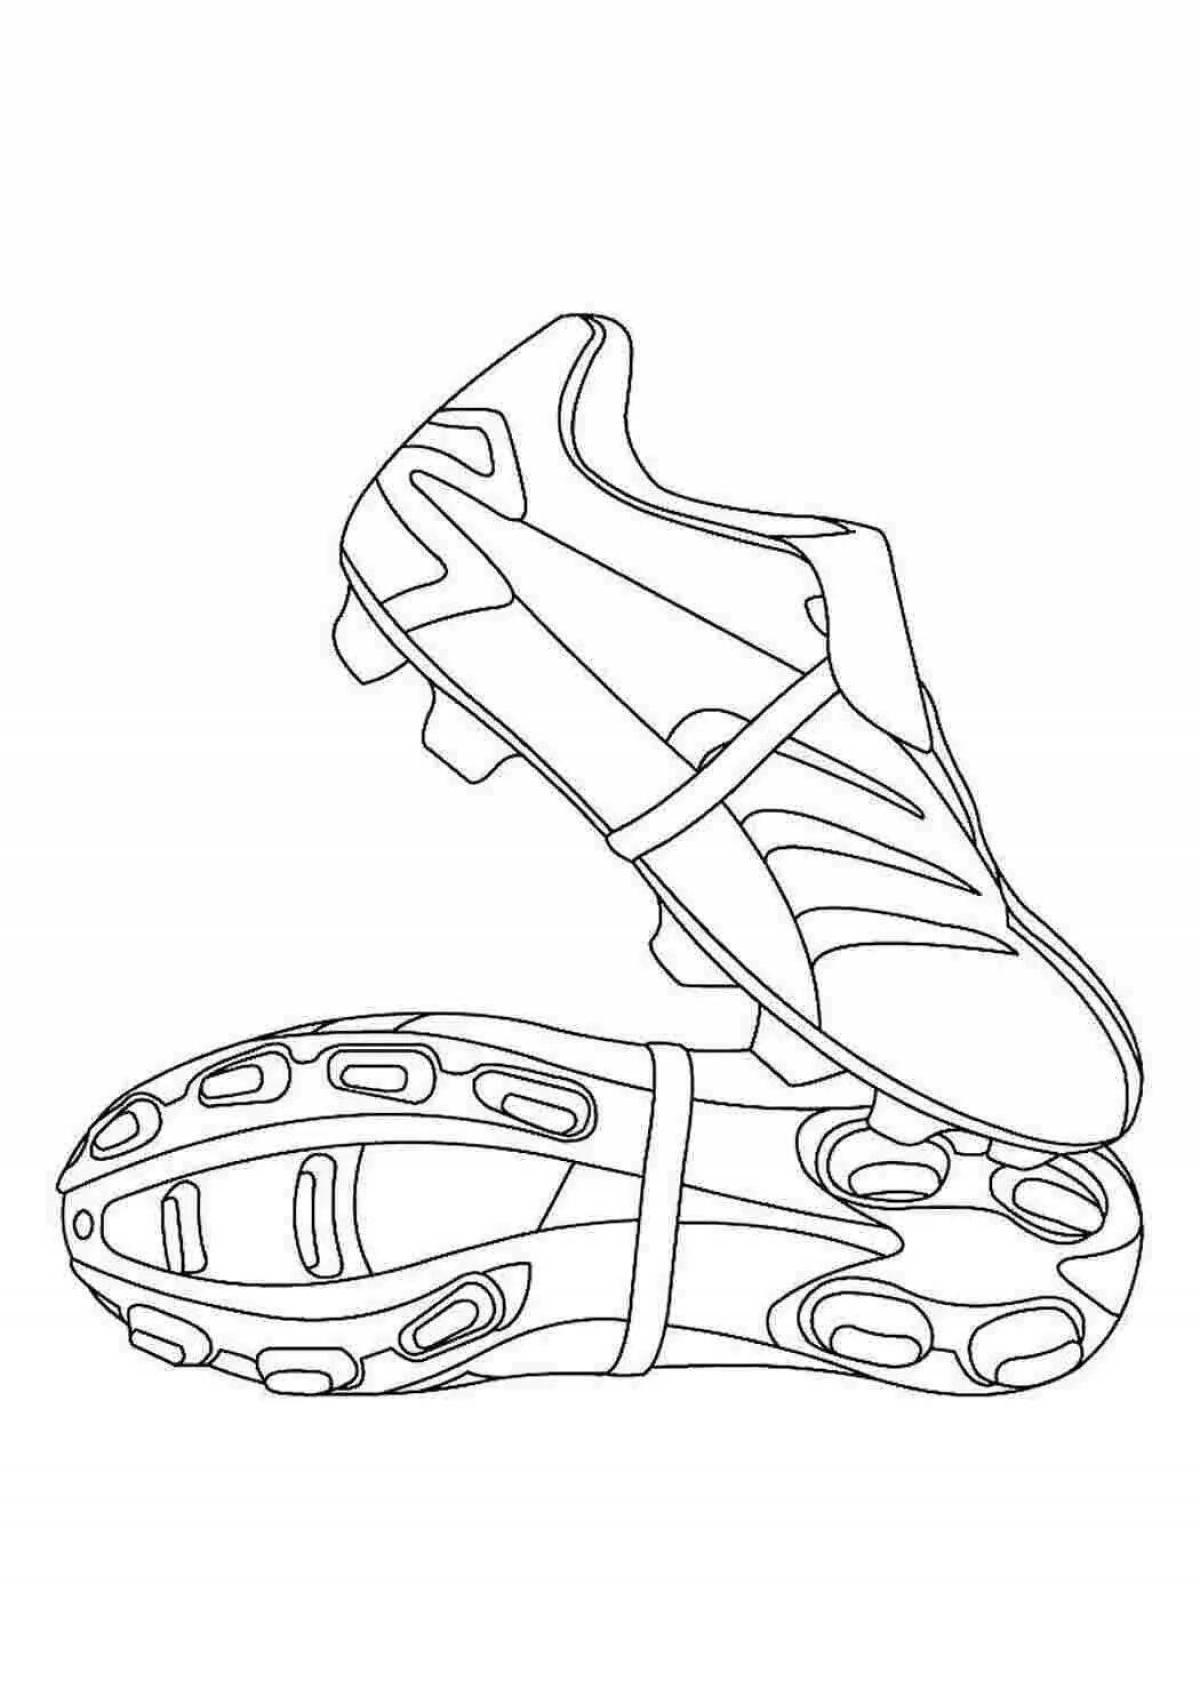 Coloring page dazzling nike boots